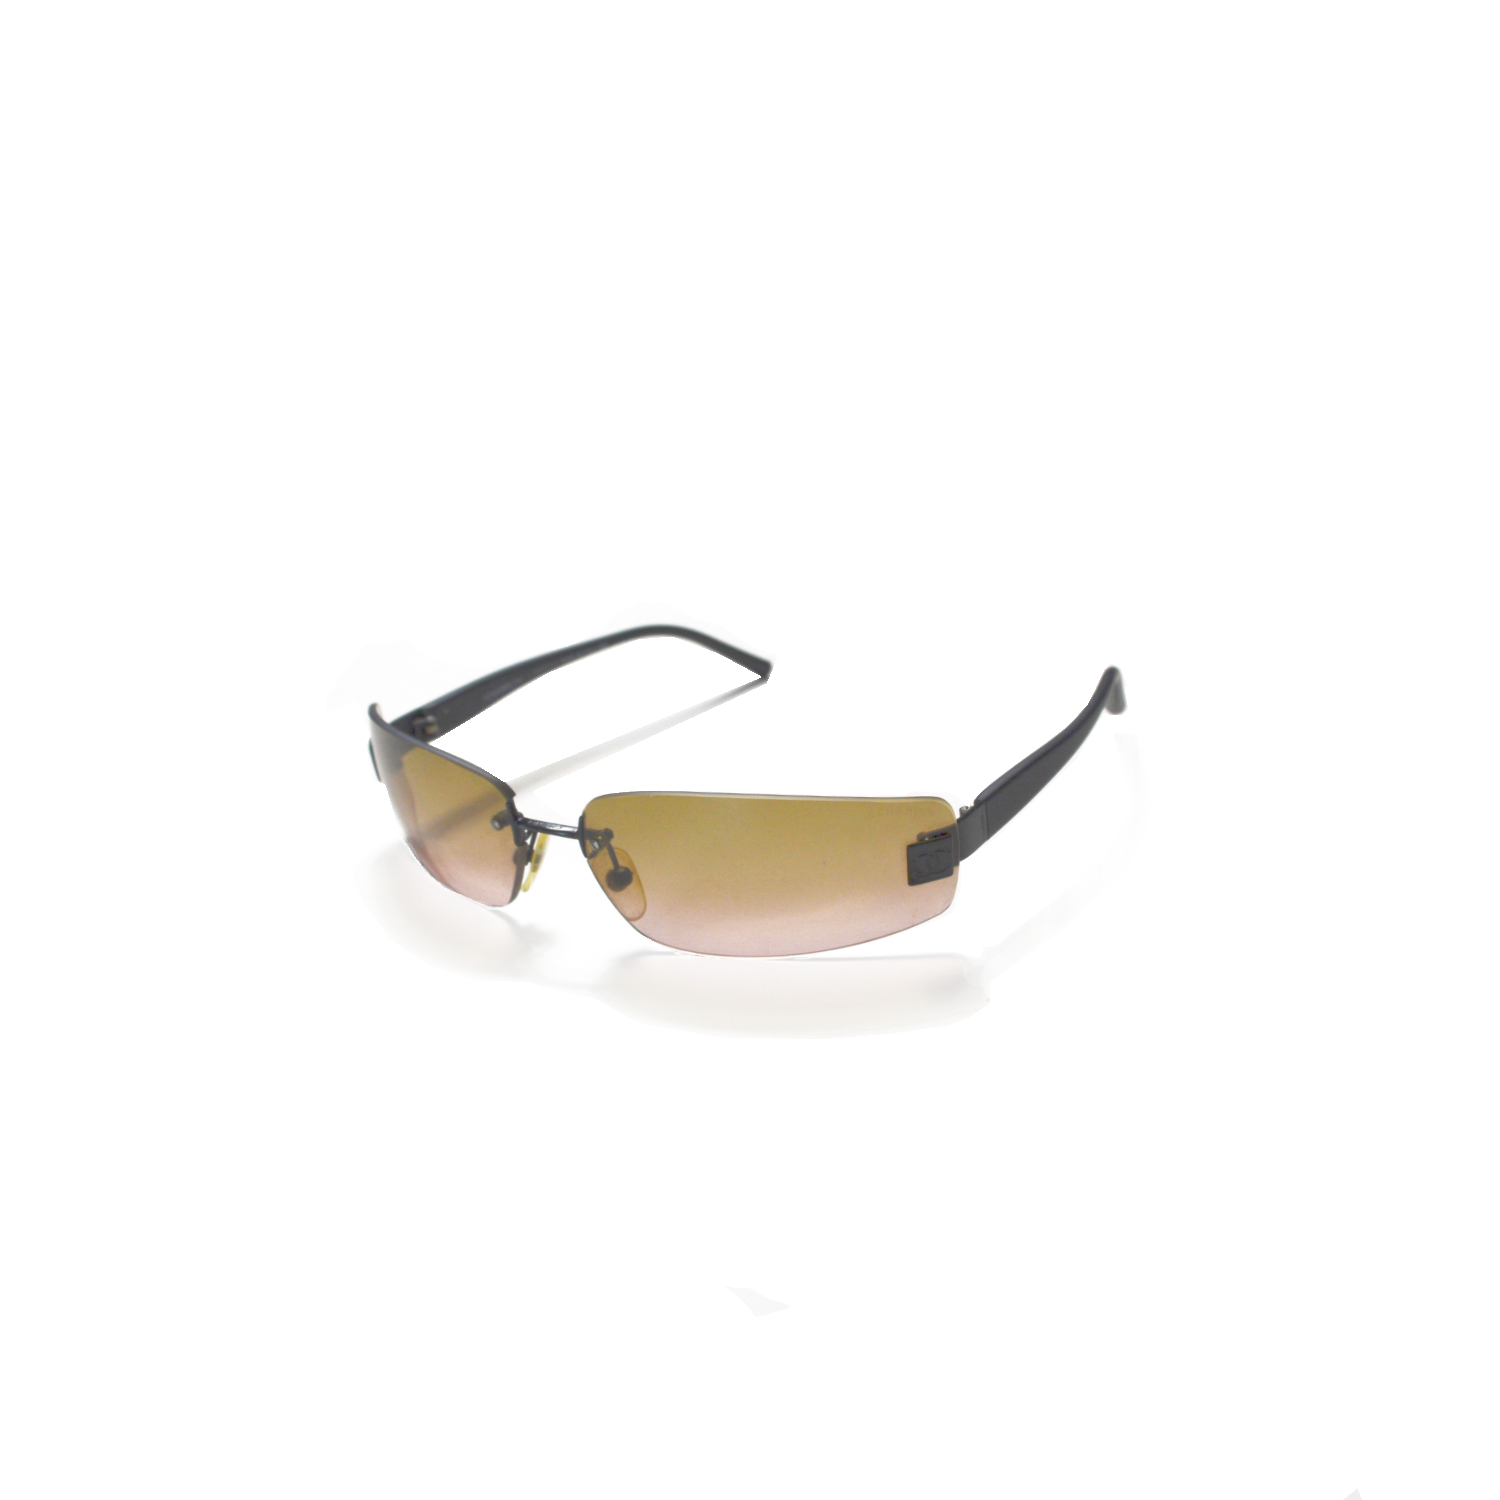 Chanel Ombre Rimless Sunglasses in Brown | NITRYL